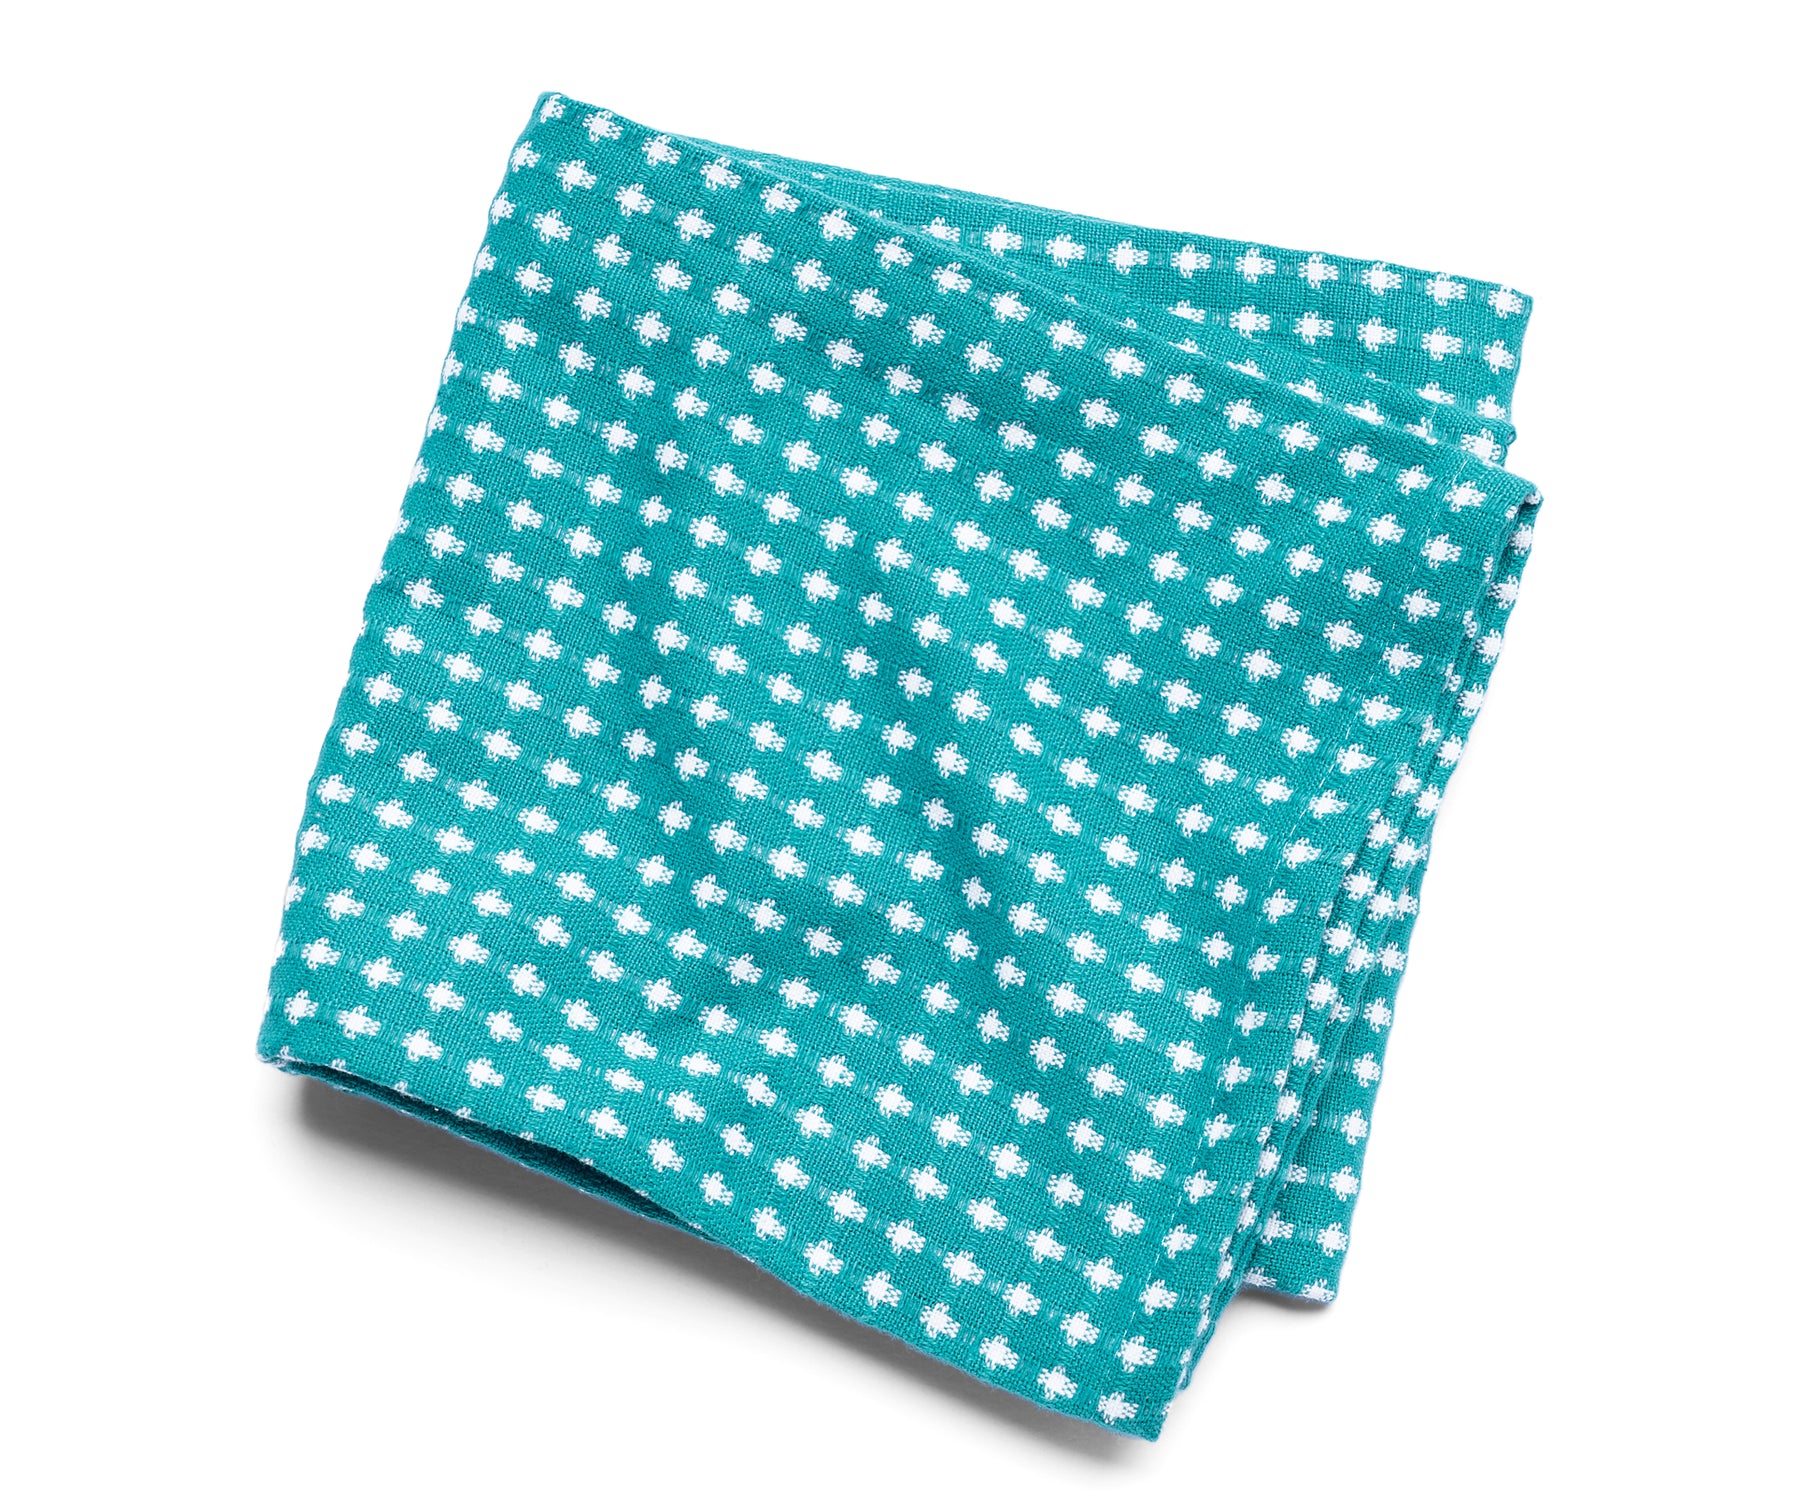 tea towels for kitchen, white and teal pattern kitchen towels, reusable kitchen towels